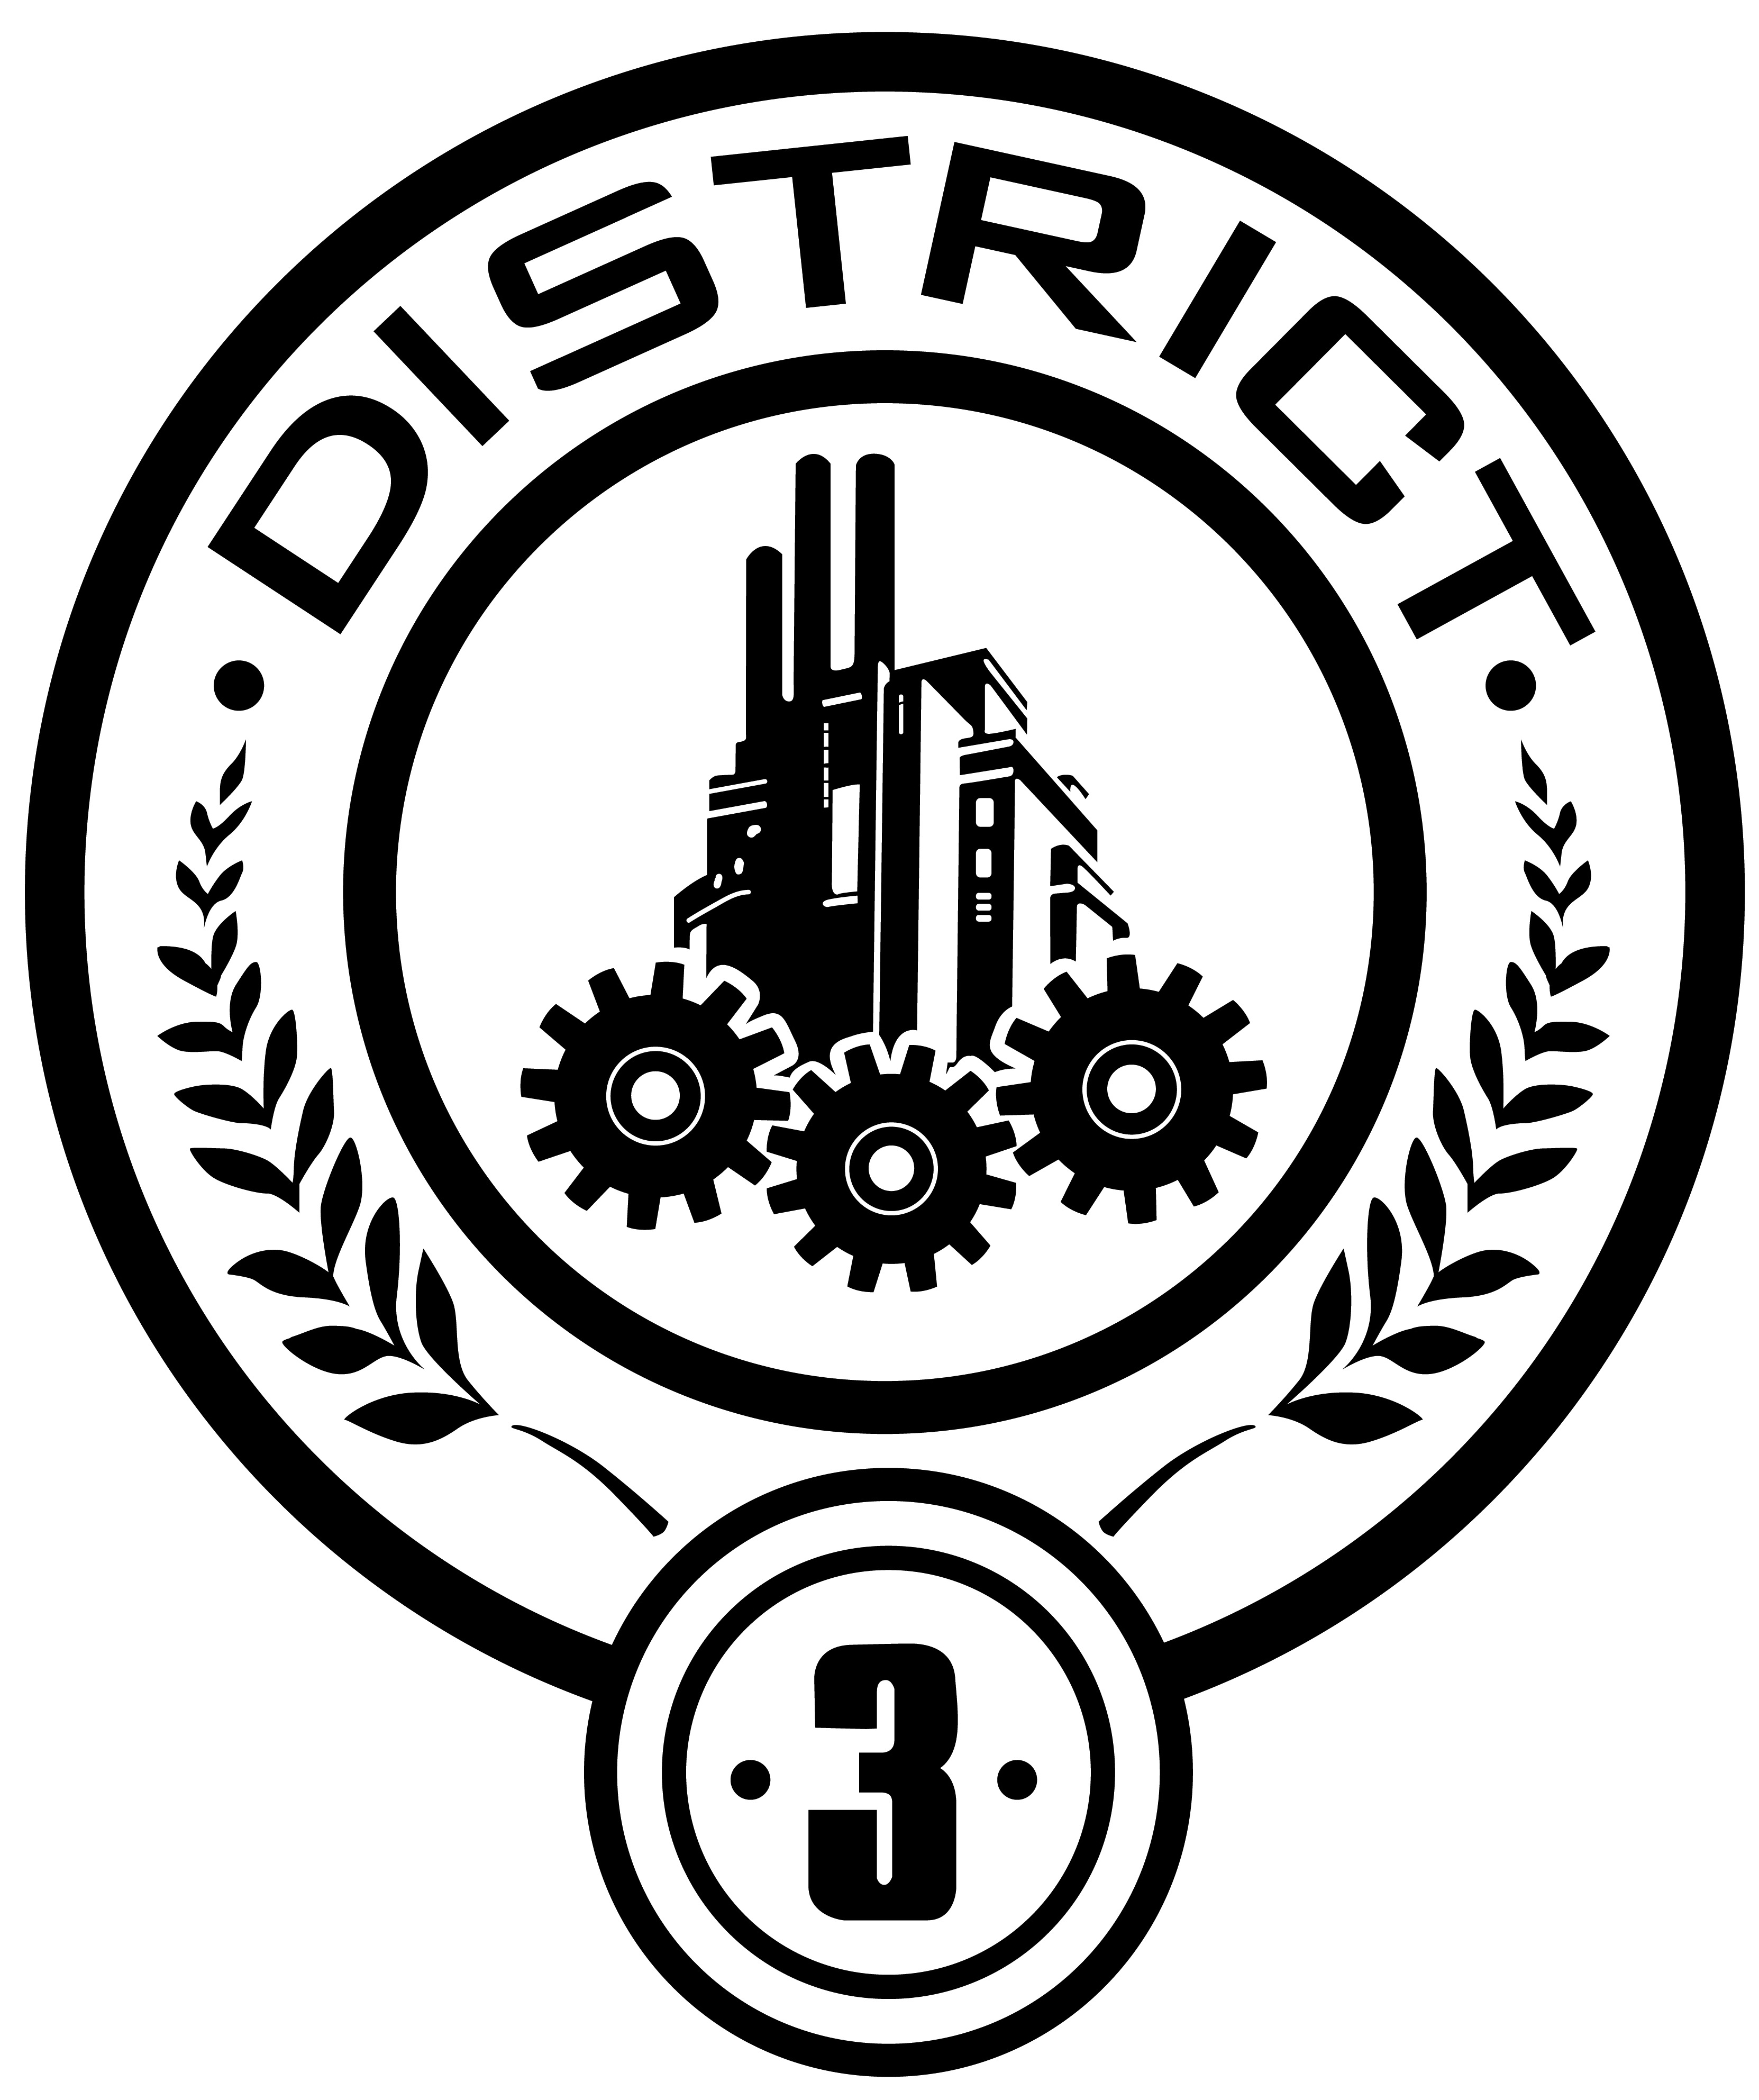 District 3 Seal